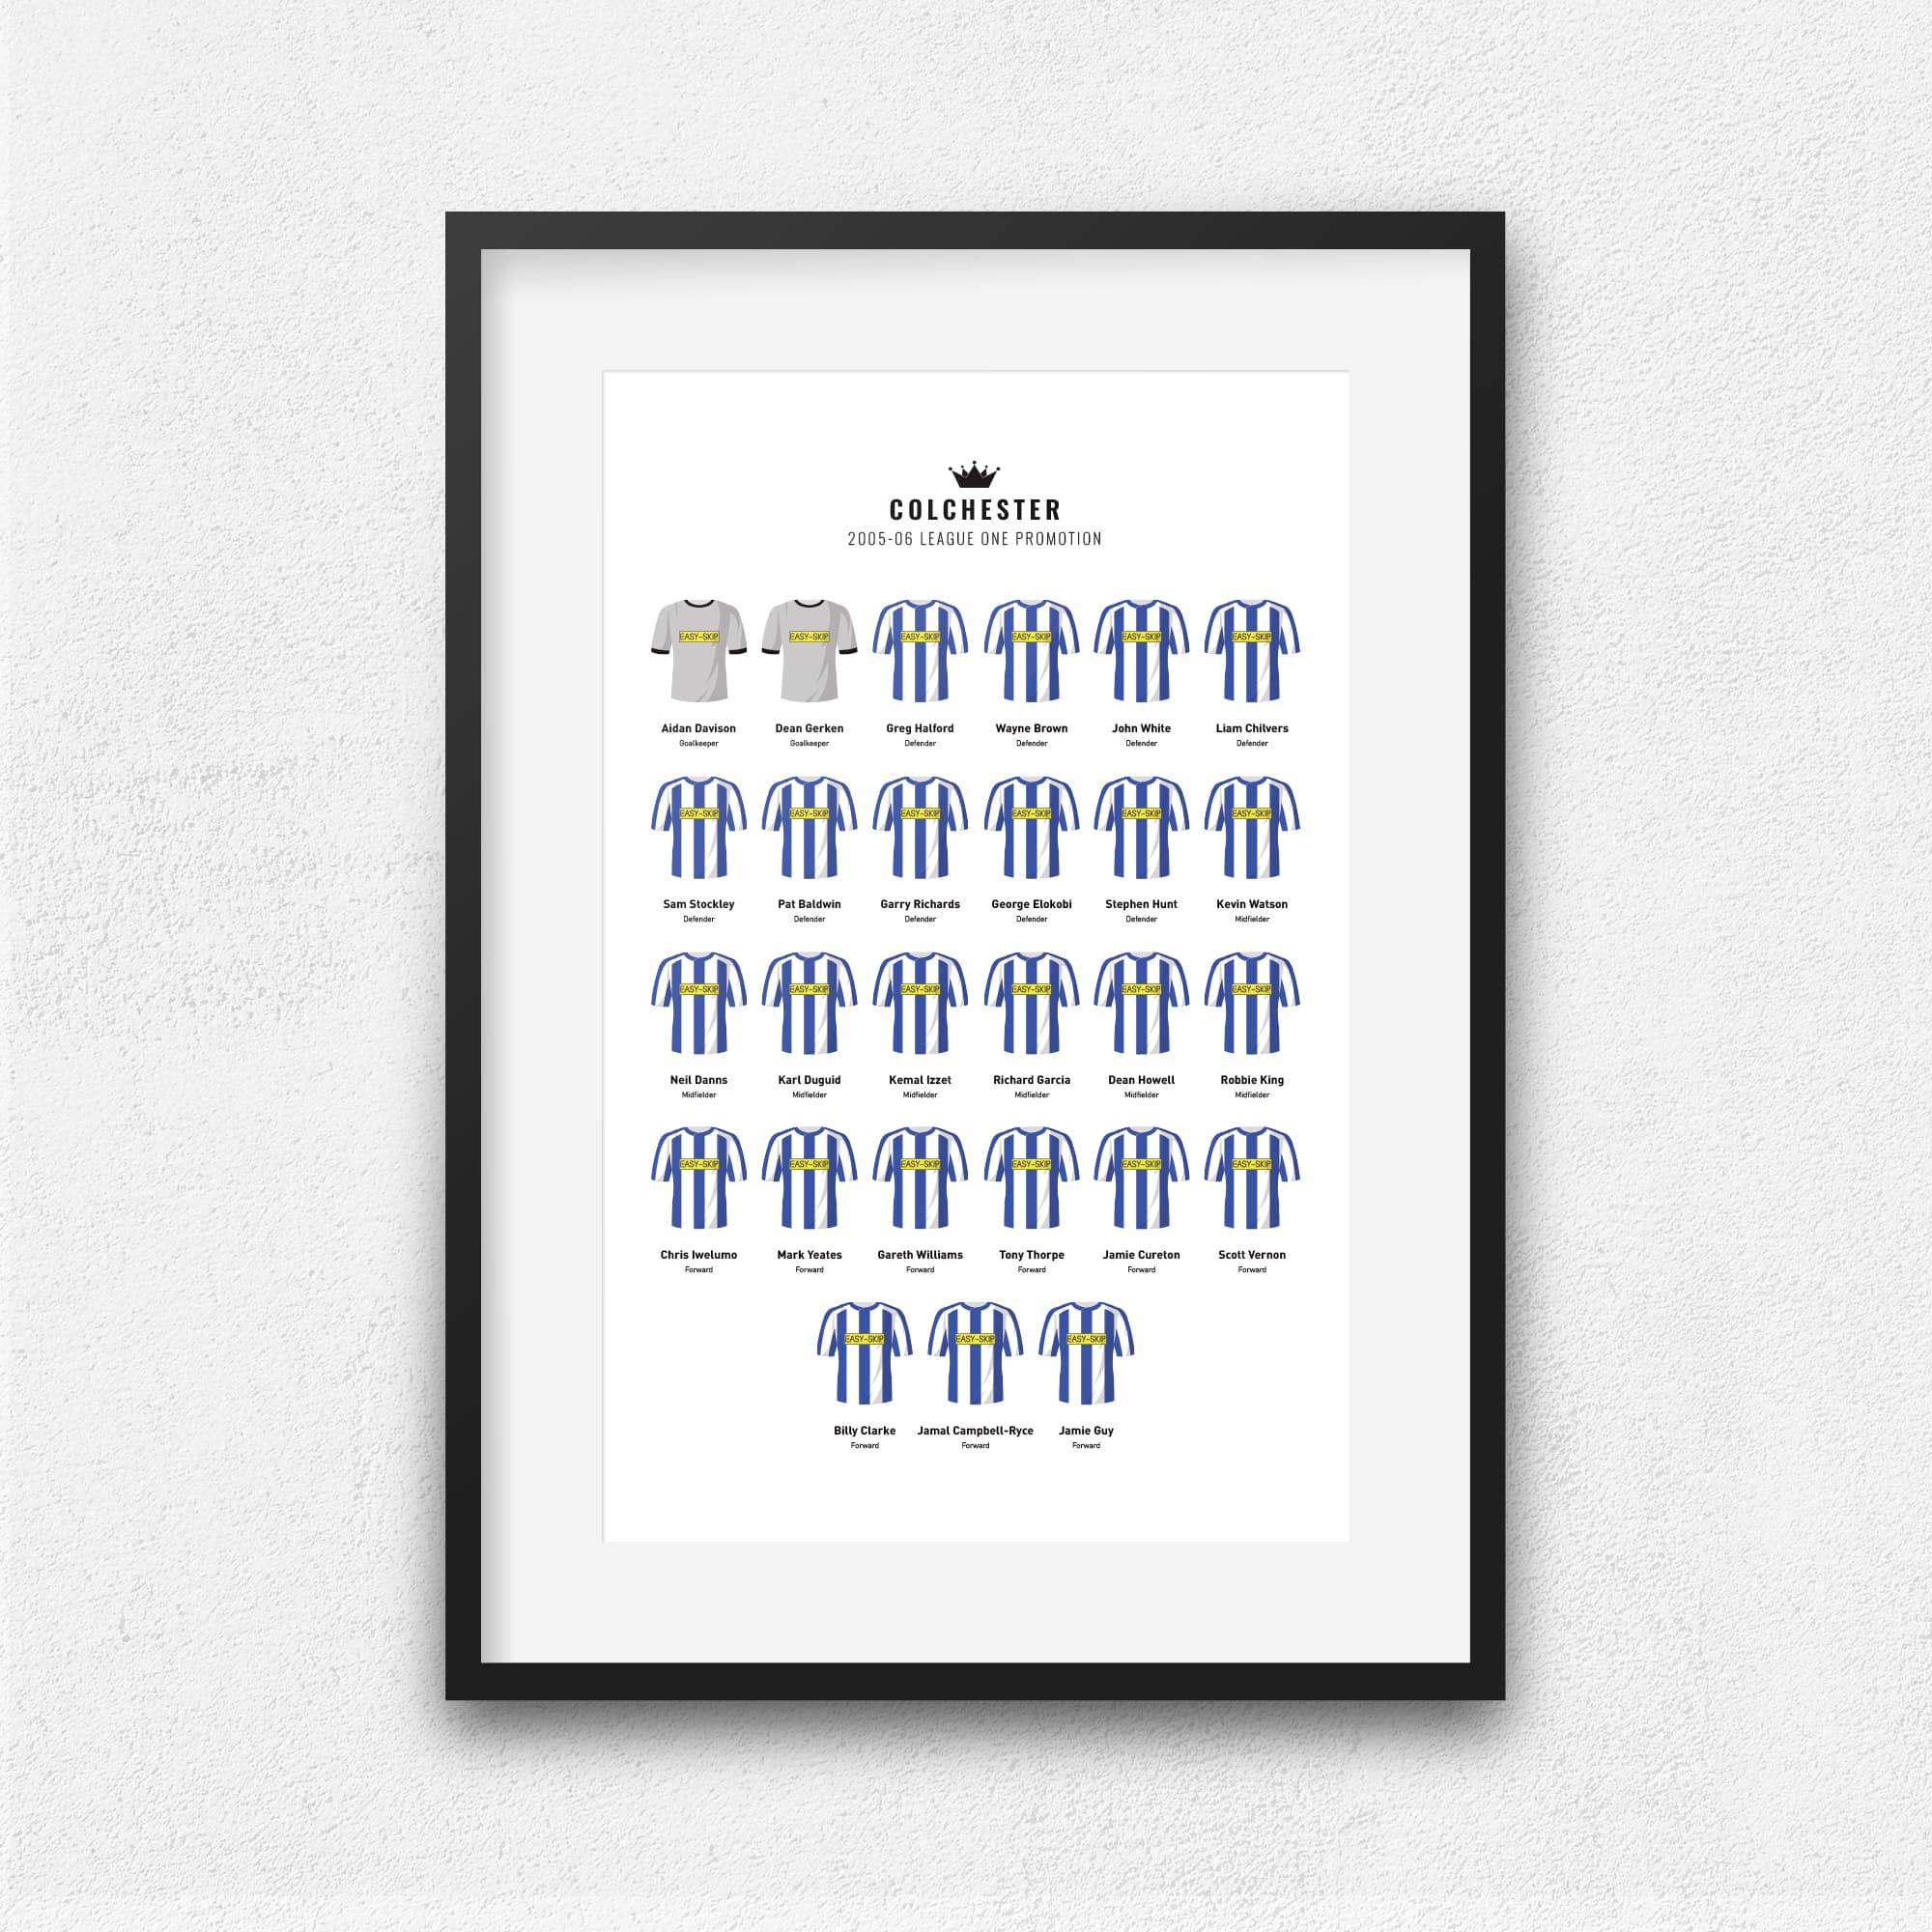 Colchester 2006 League 1 Promotion Football Team Print Good Team On Paper